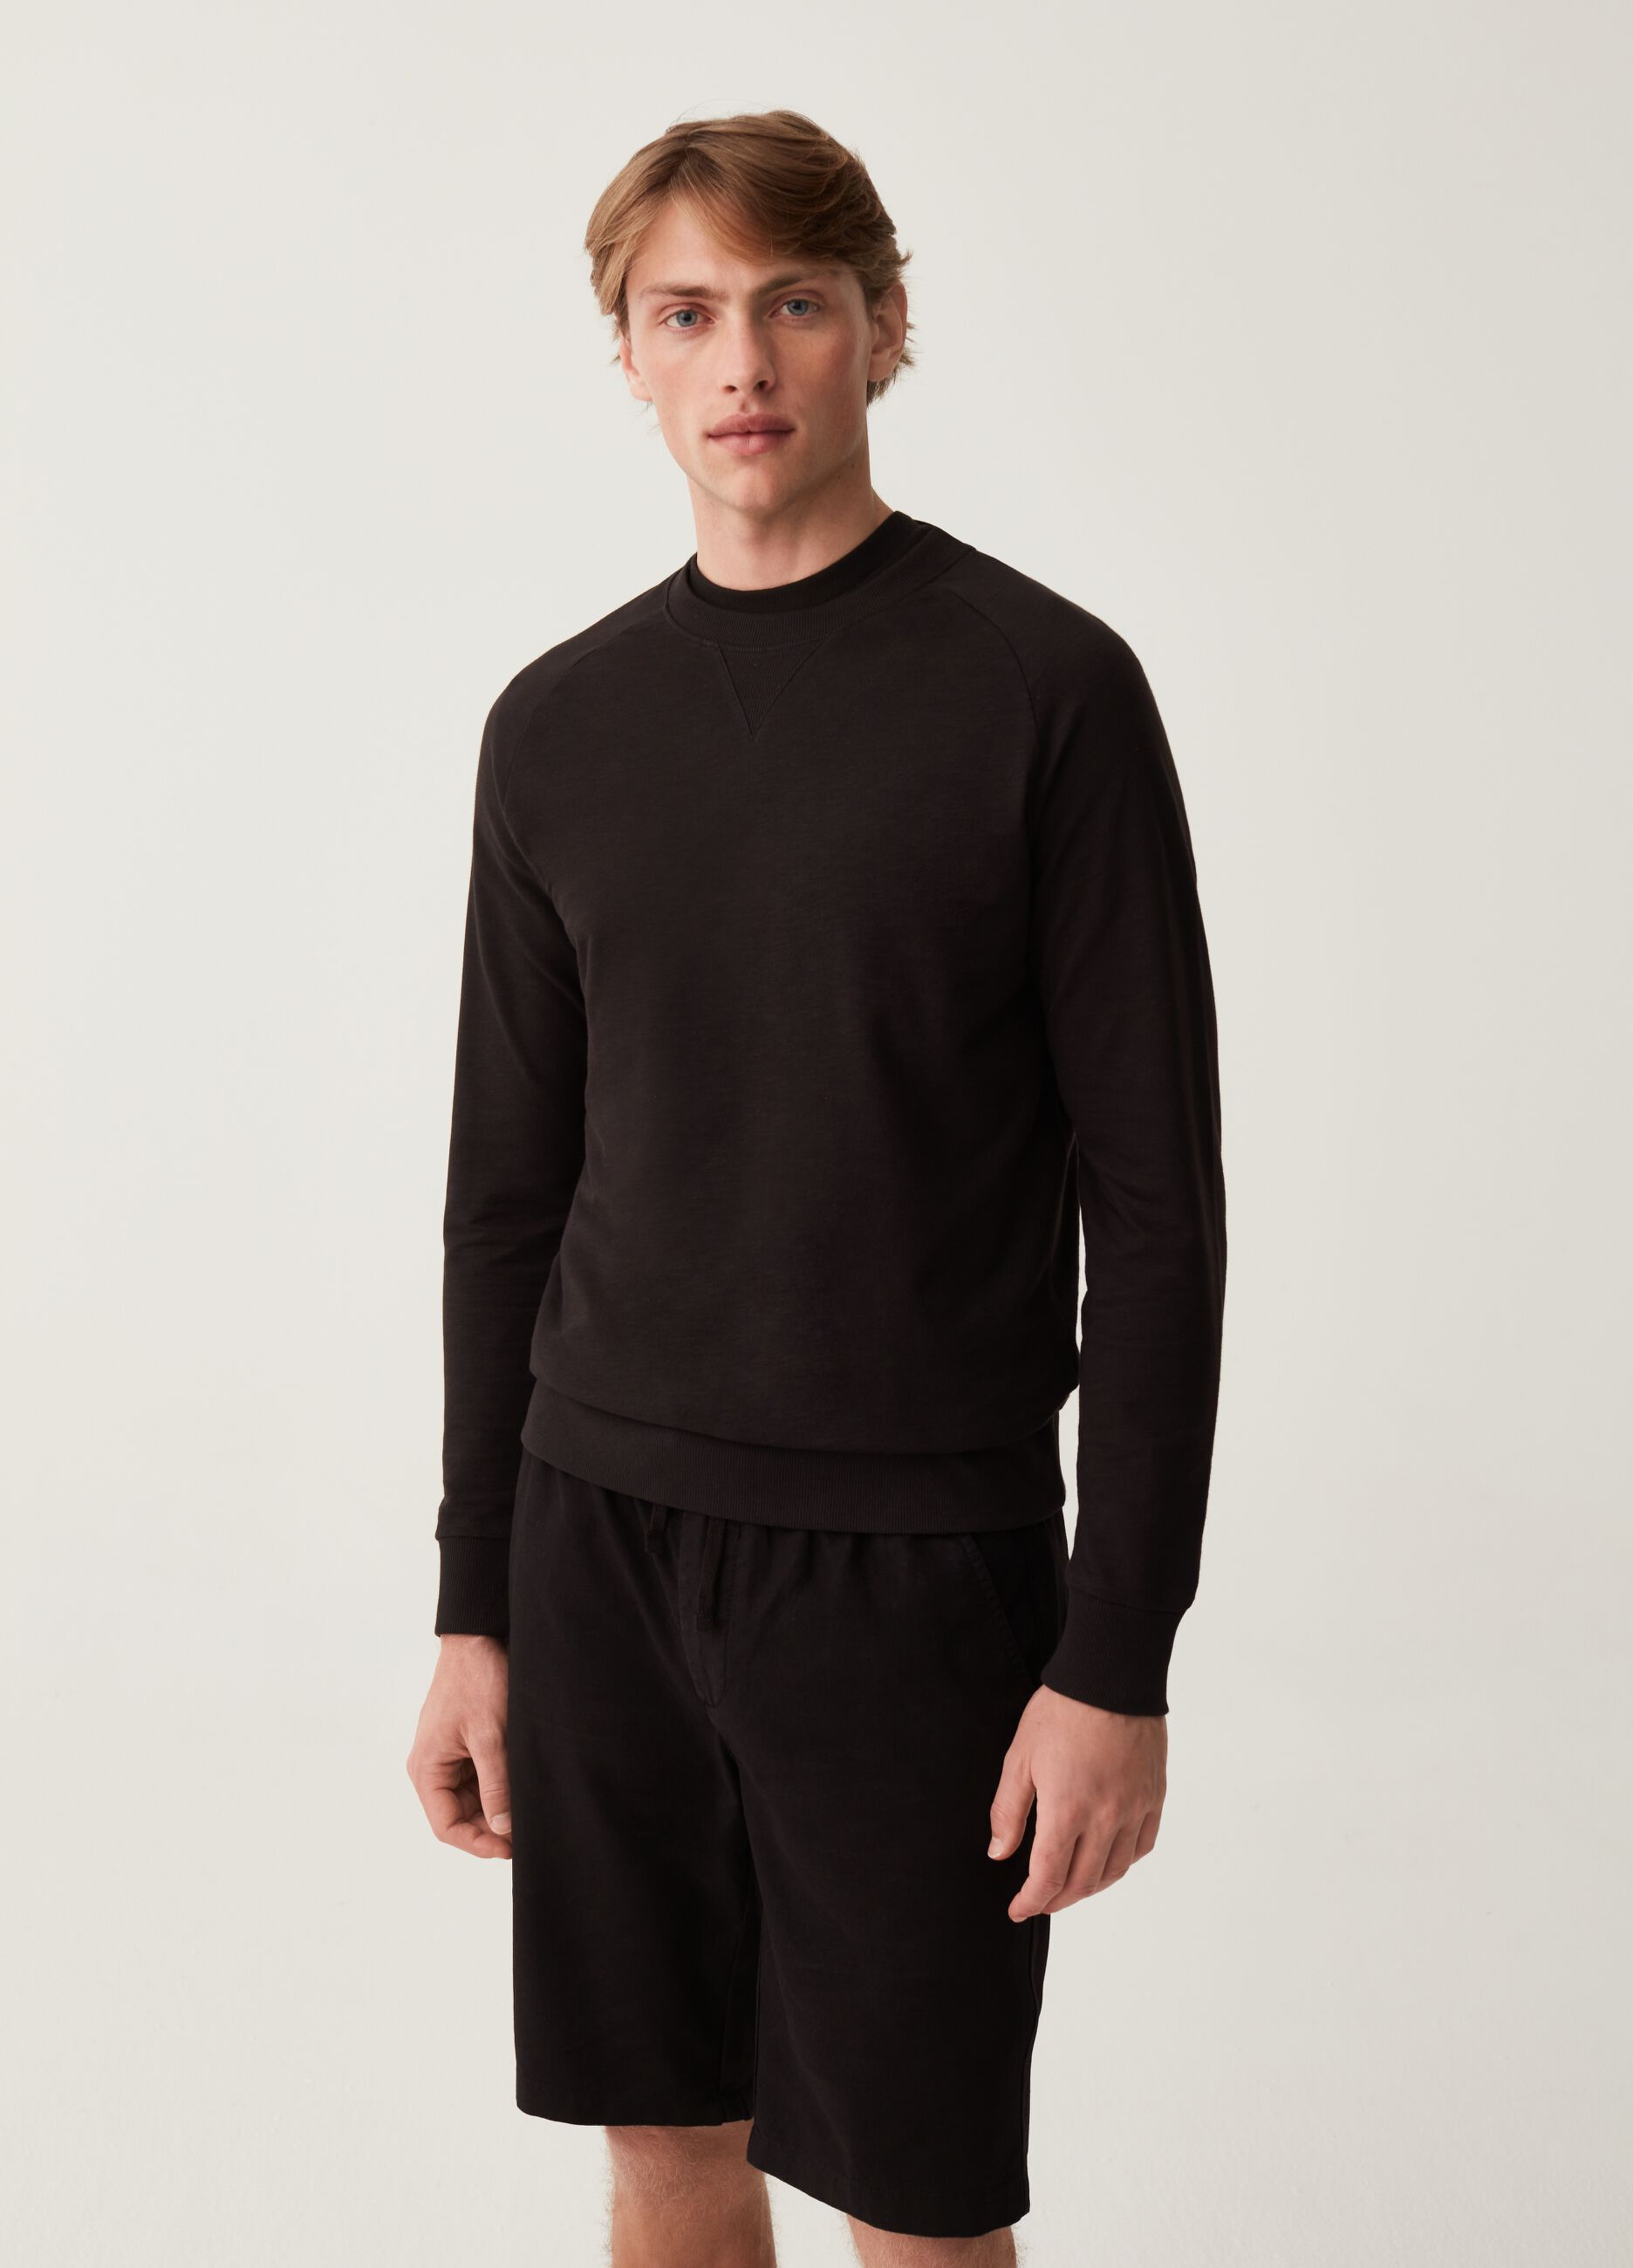 LESS IS BETTER cotton sweatshirt with detail at the neck